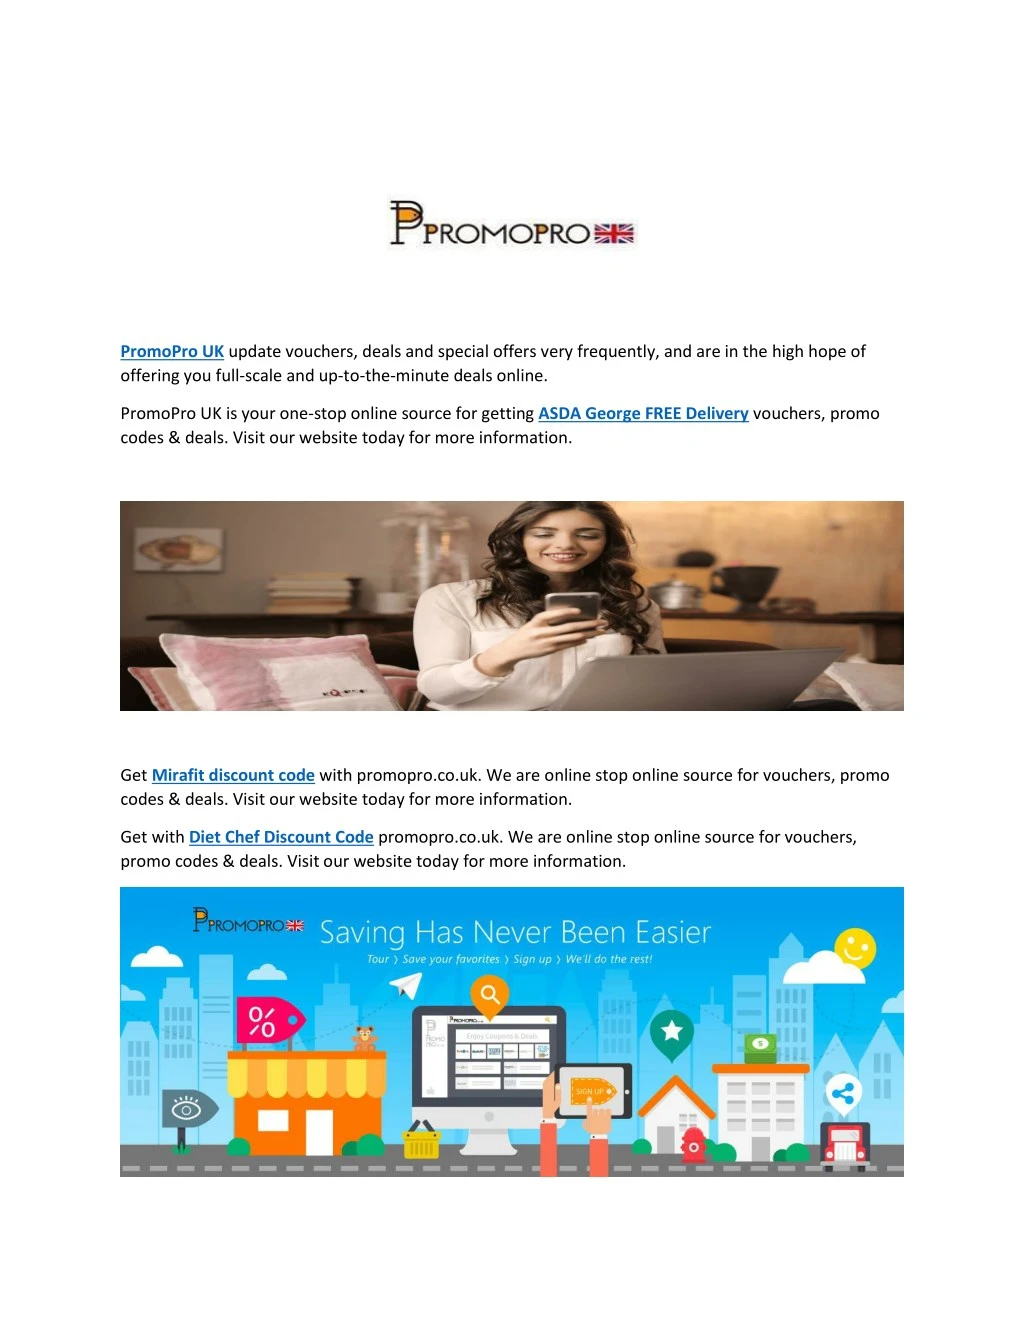 promopro uk update vouchers deals and special n.